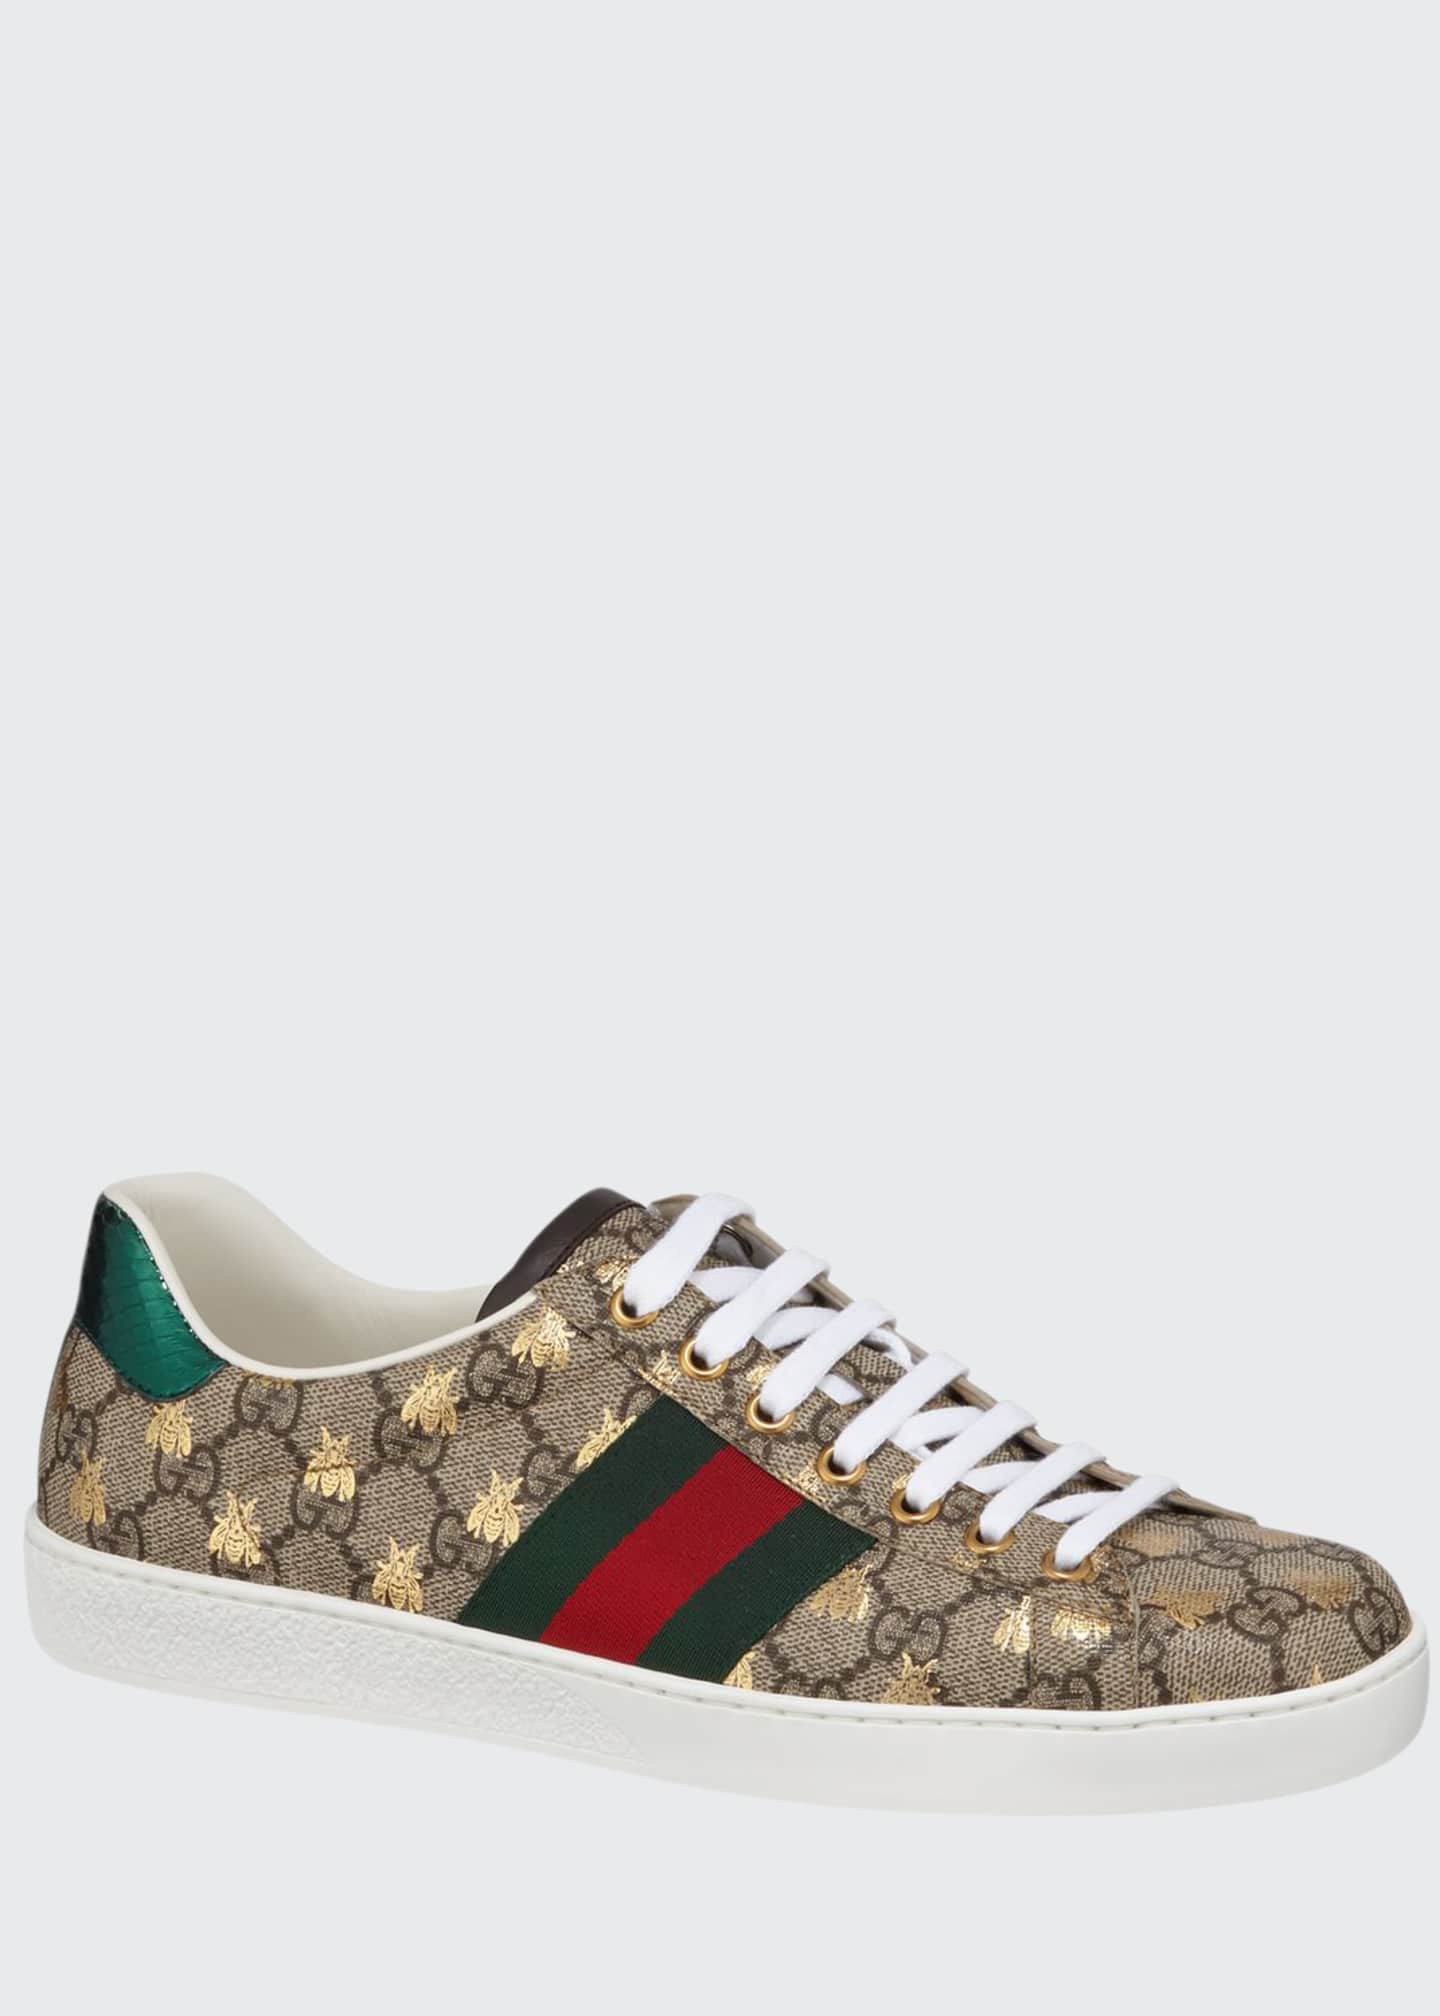 Gucci Men's Rhyton Leather Sneakers with Mouth Print